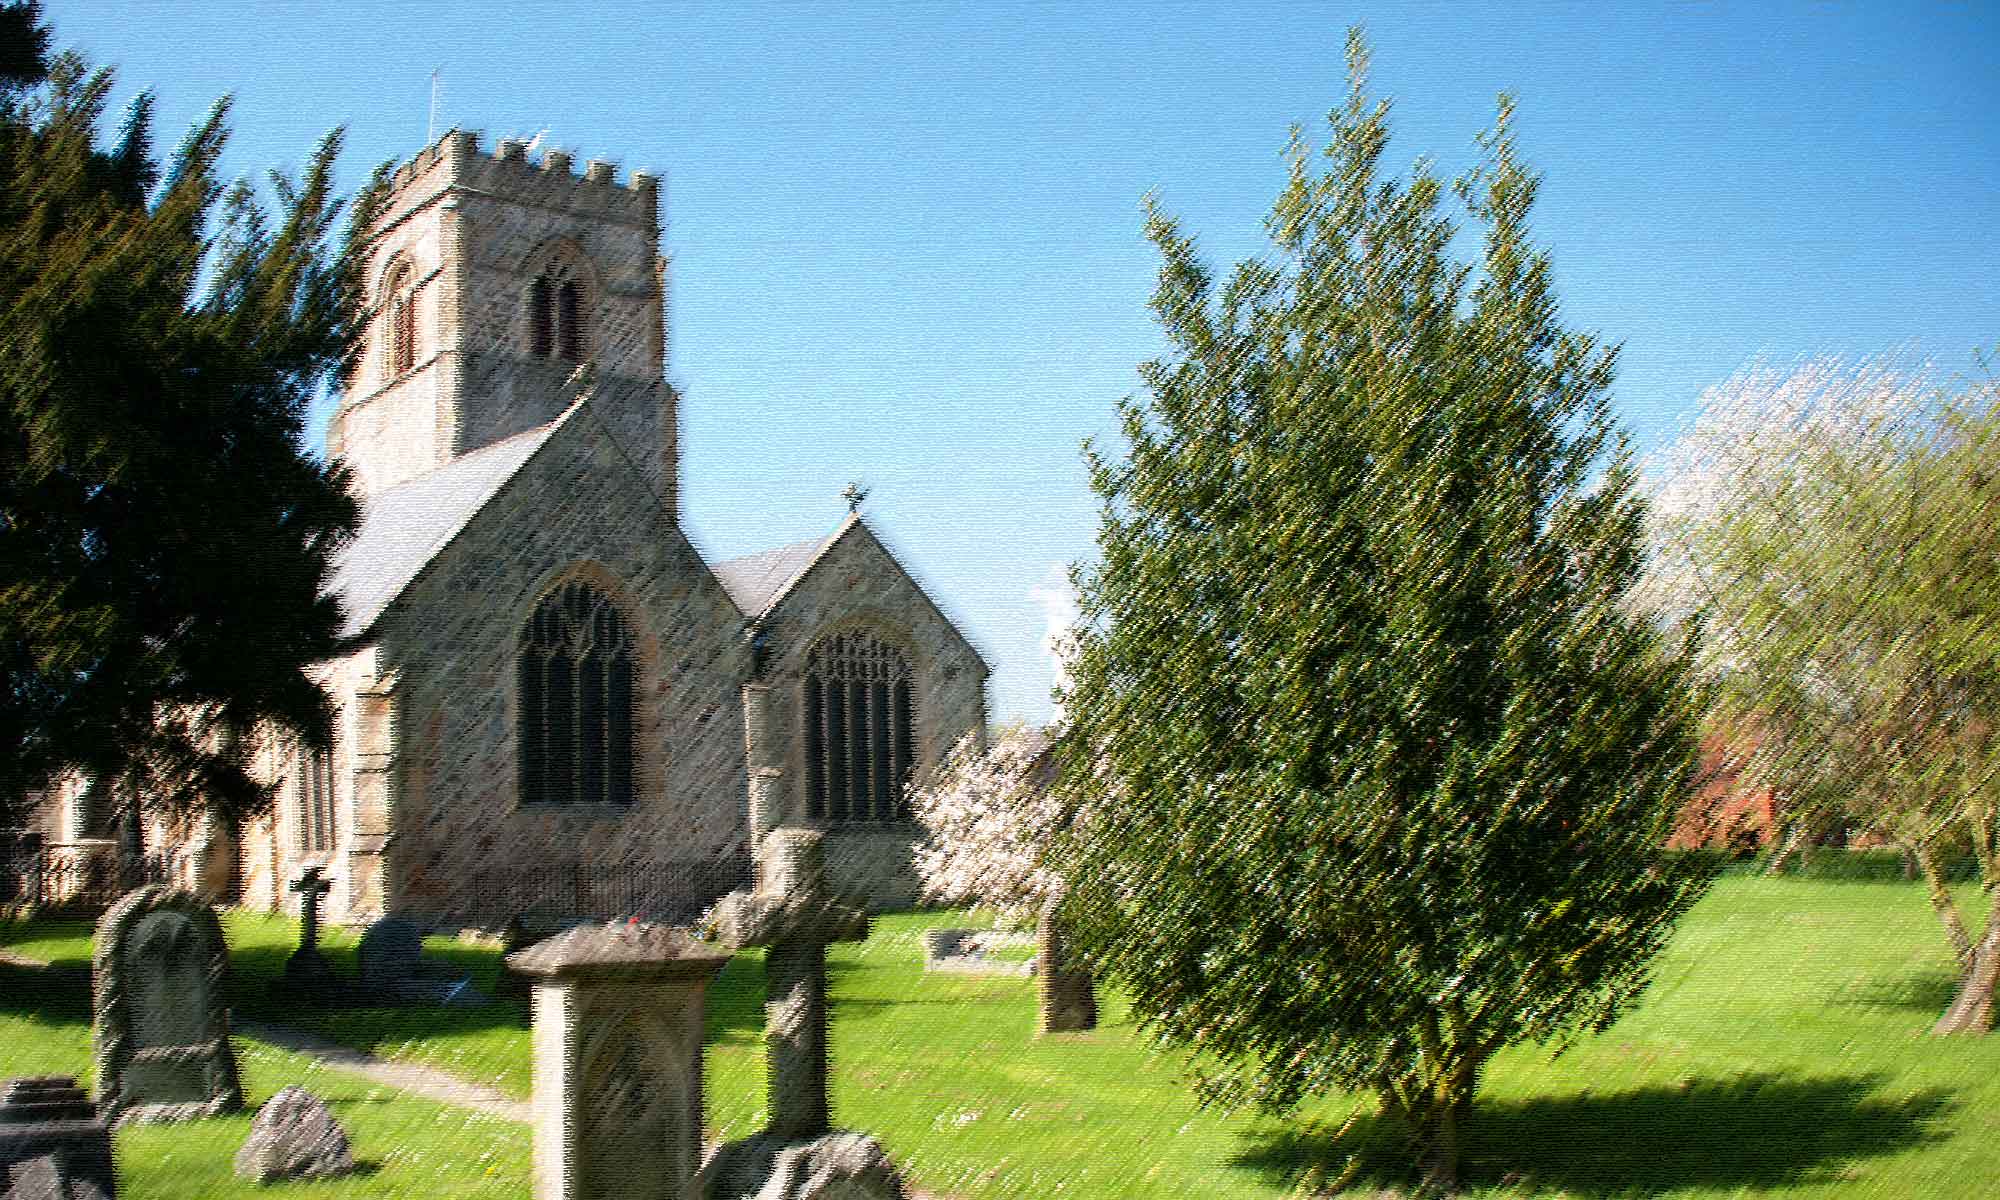 St Mary's Church, Chirk